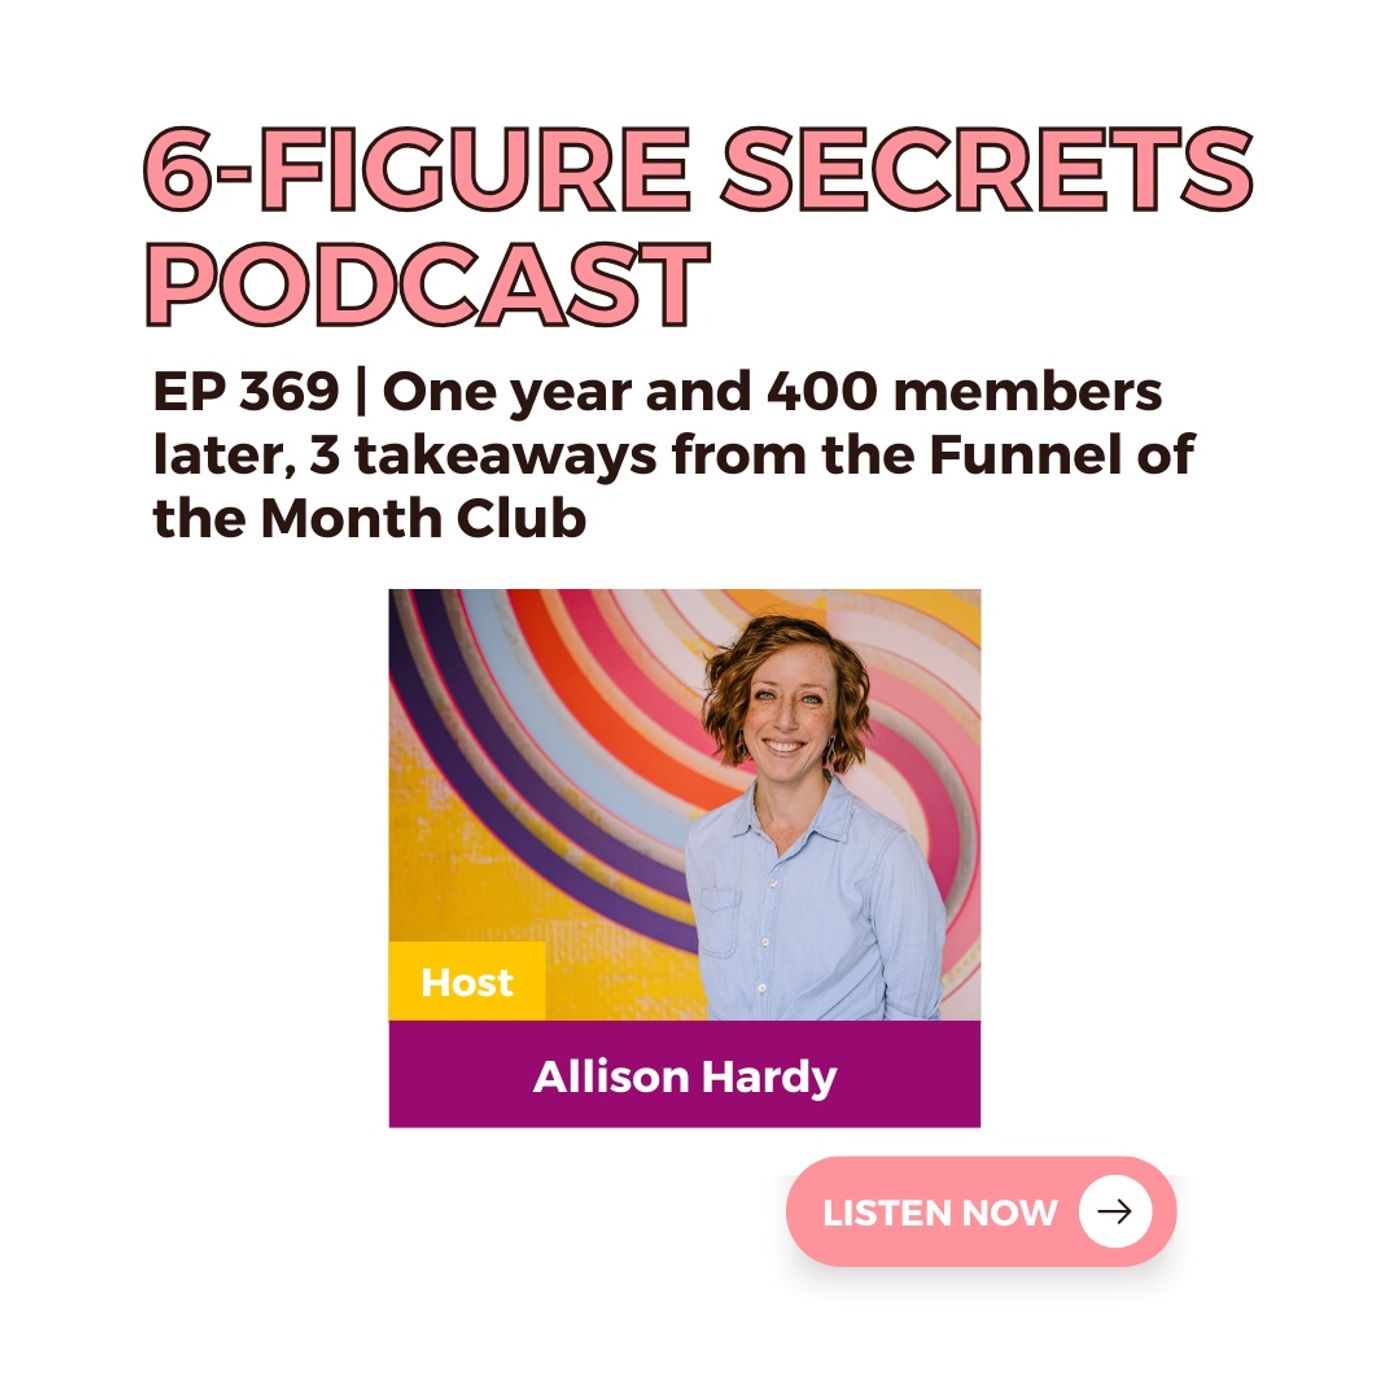 EP 369 | One year and 400 members later, 3 takeaways from the Funnel of the Month Club